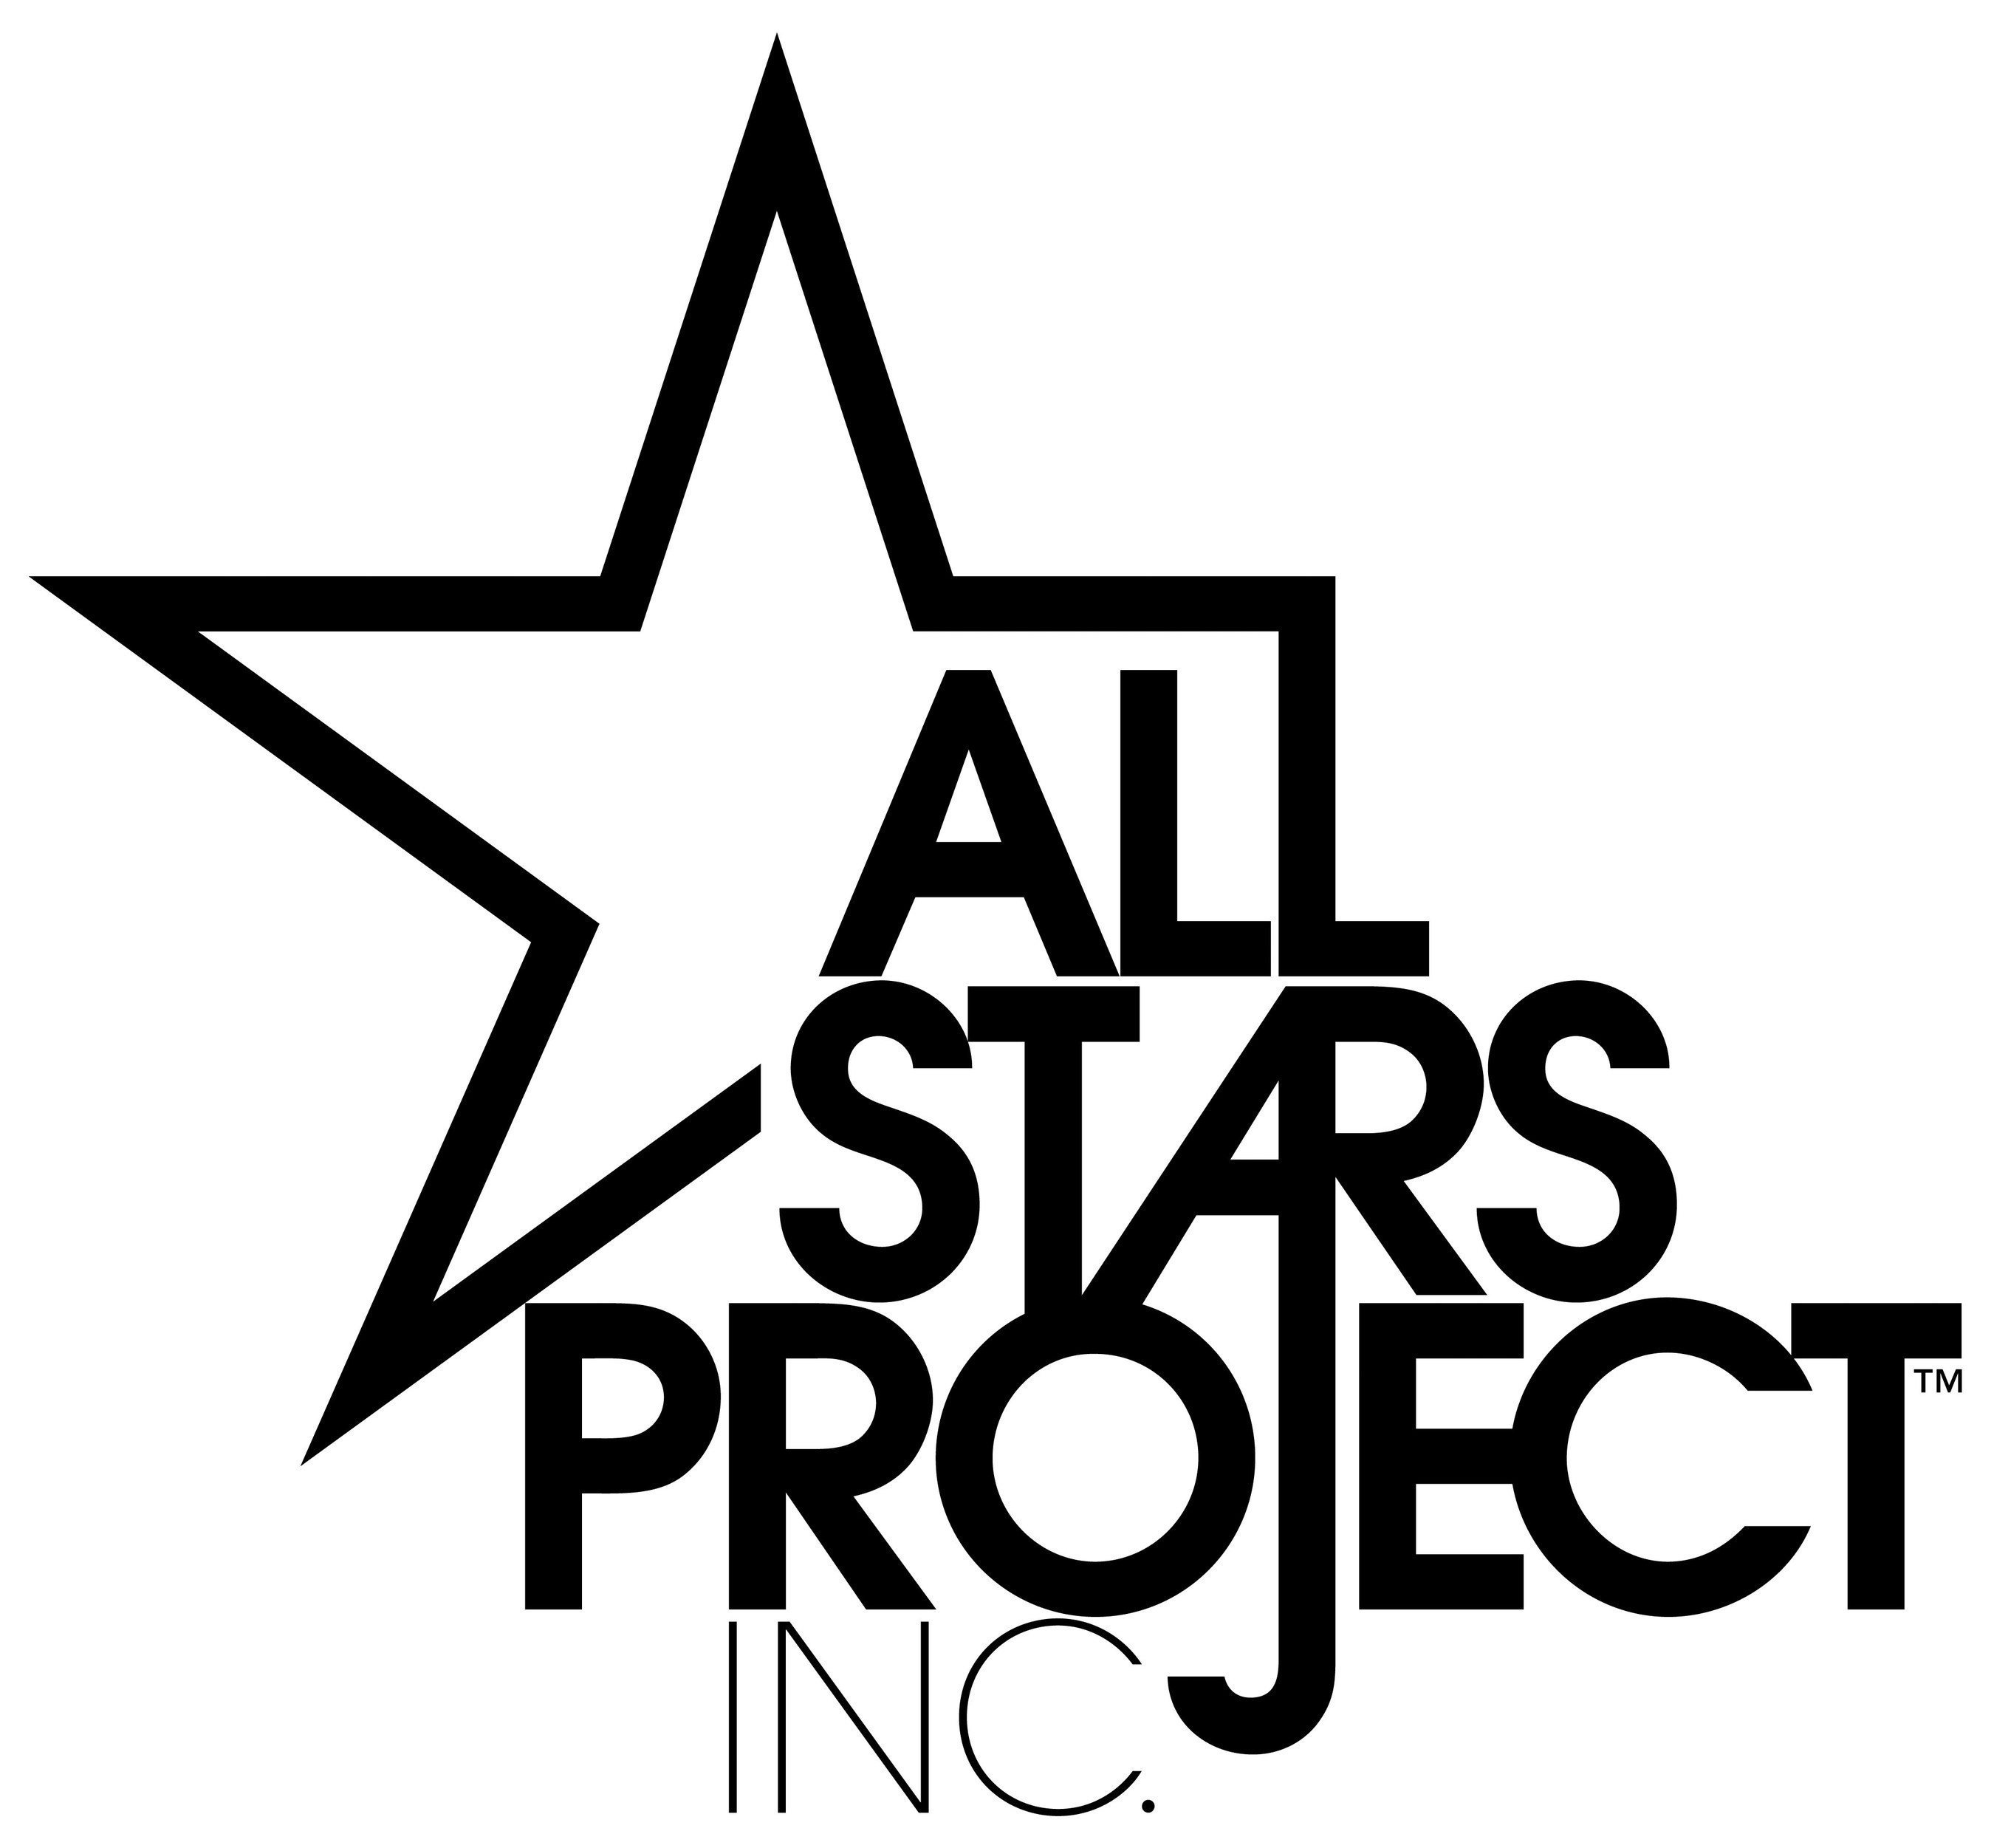 The All Stars Project is a privately funded national nonprofit organization founded in 1981 whose mission is to transform the lives of youth and poor communities using the developmental power of performance, in partnership with caring adults.